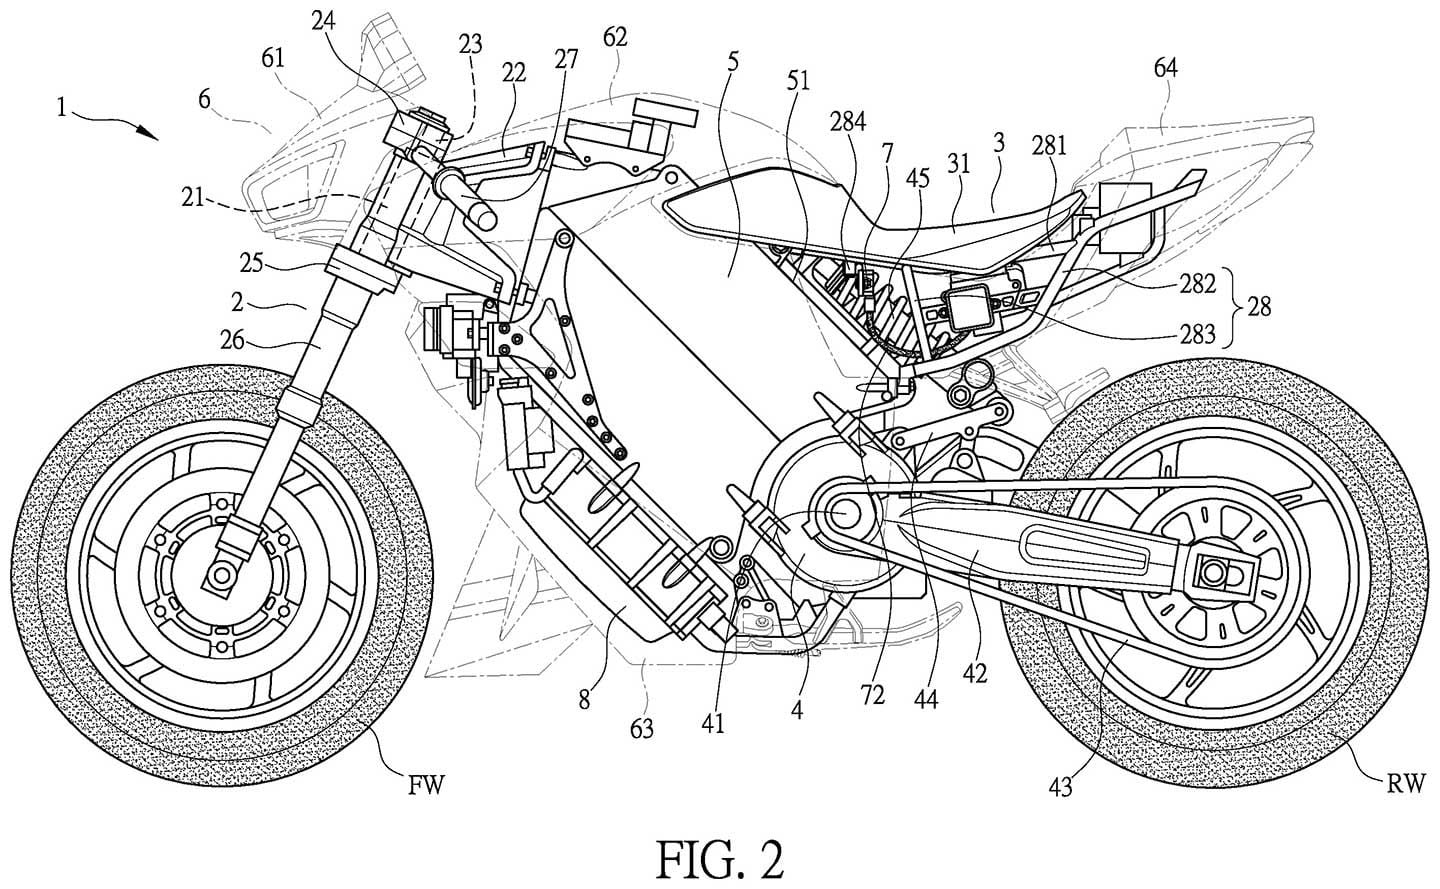 Kymco has filed patents related to its upcoming LiveWire S3, which it will manufacture in partnership with Harley-Davidson’s LiveWire.